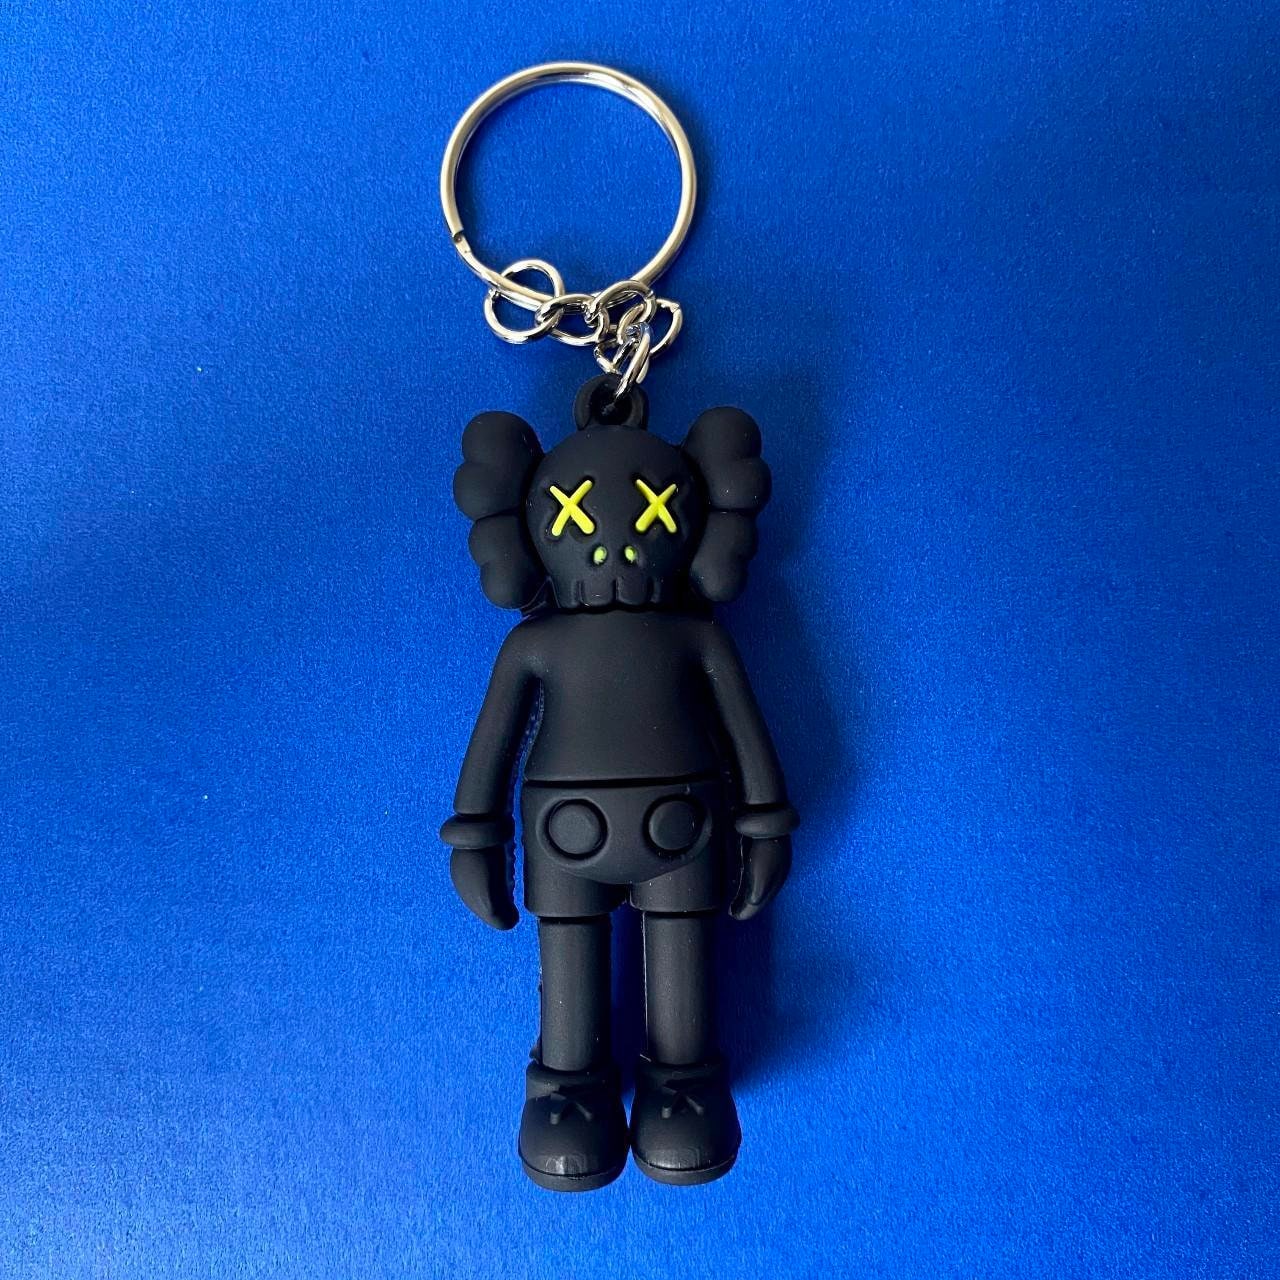 Buy 5 Pack Cartoon KAWS Keychains Figures Miniatures Micro Landscape  Prefect Gift Must Have Action Figure Accessories Online at Low Prices in  India 